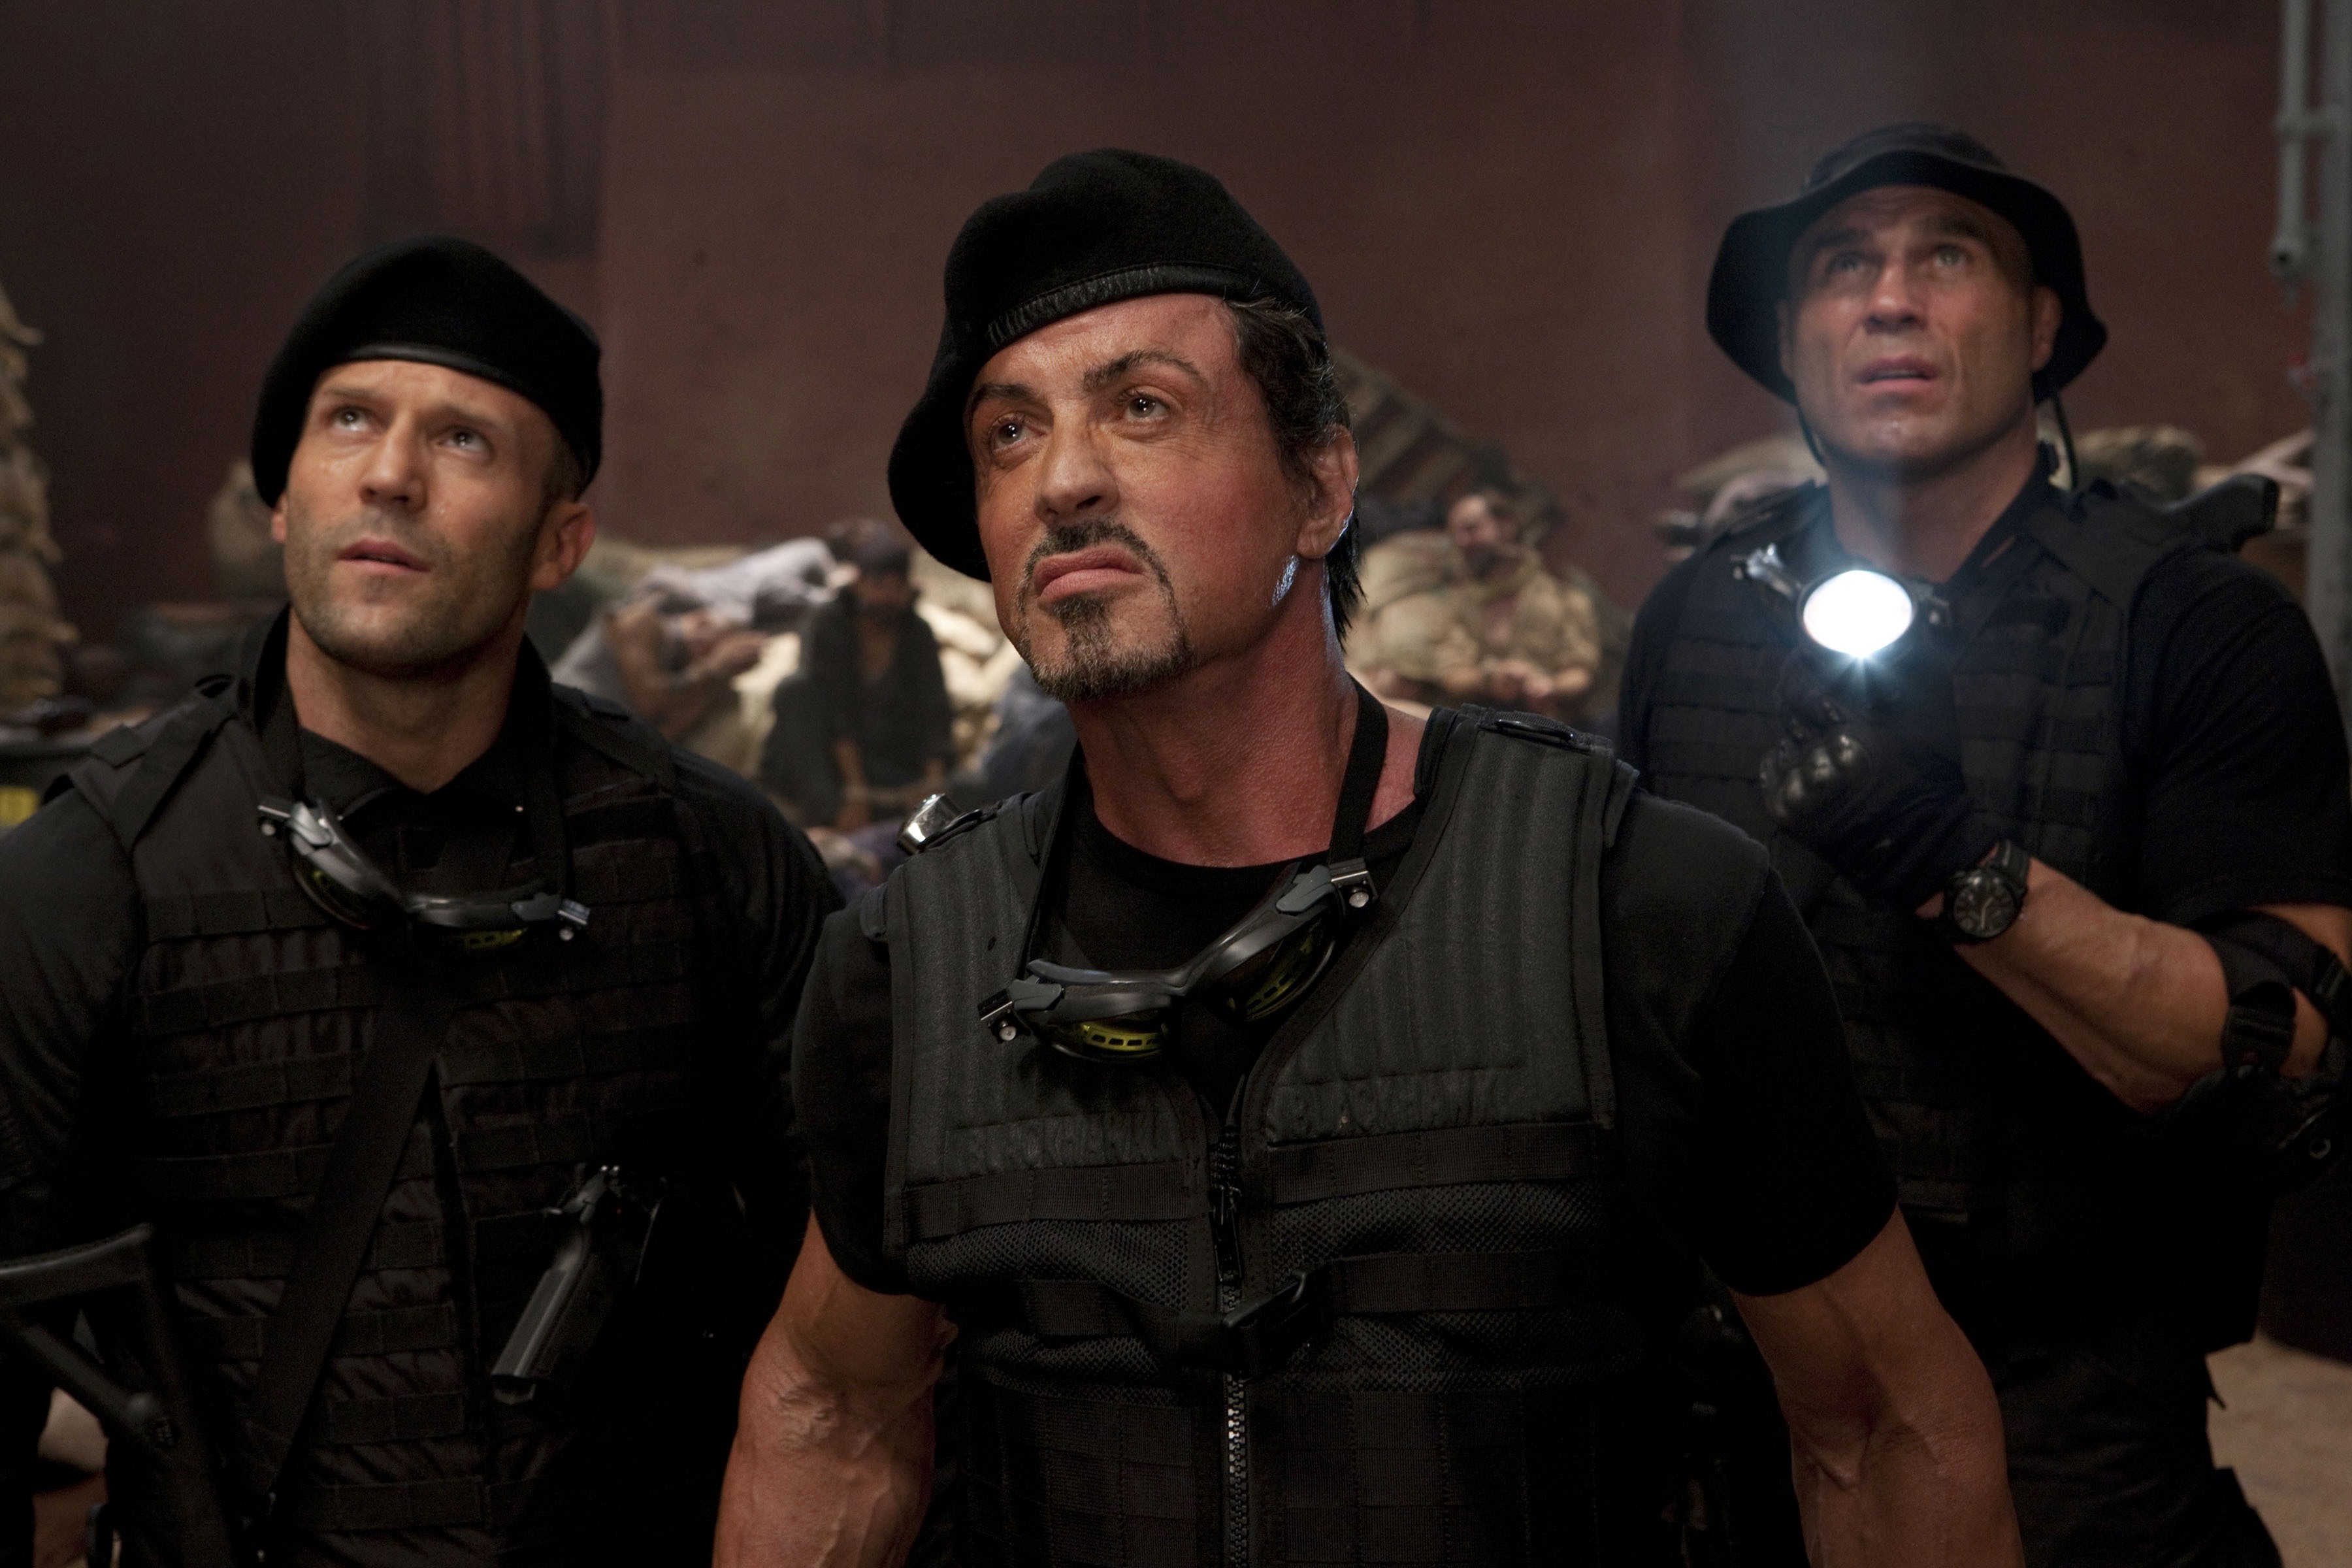 Jason Statham, Sylvester Stallone, Randy Couture, The Expendables